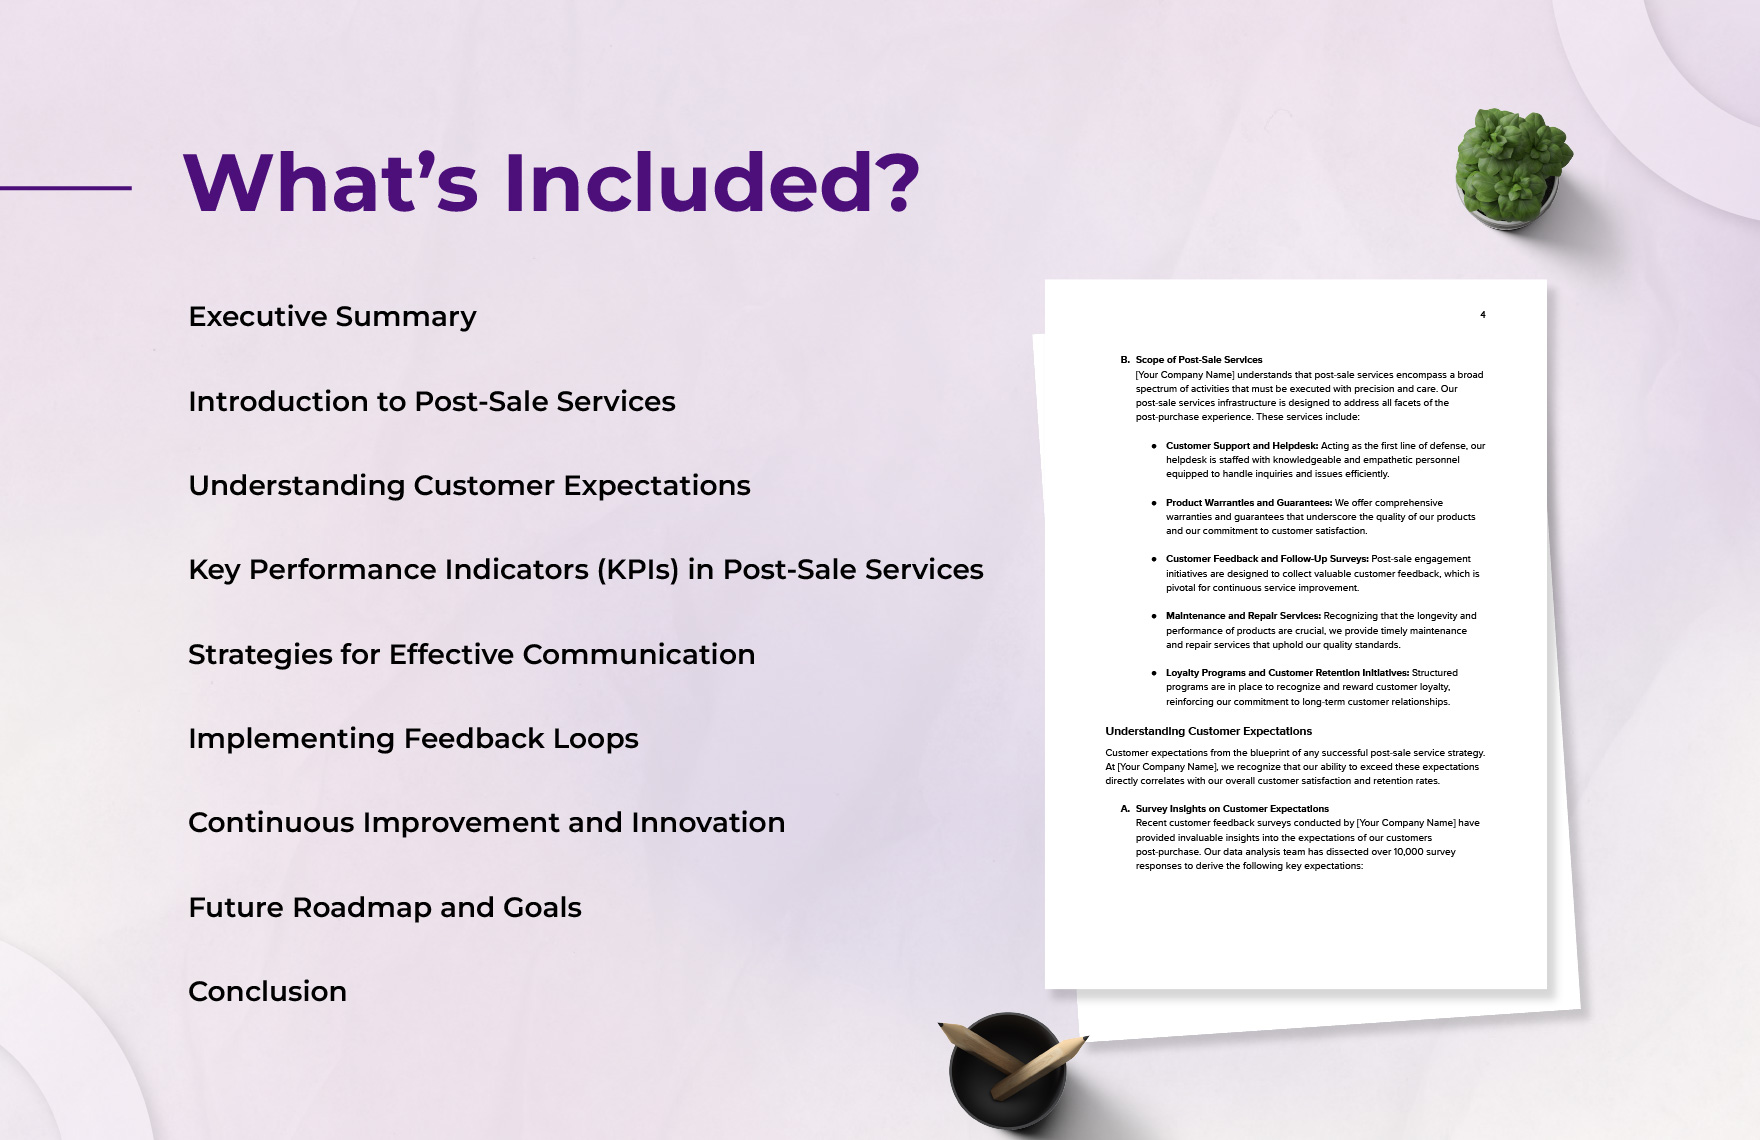 Document on Best Practices in Post-Sale Services Template